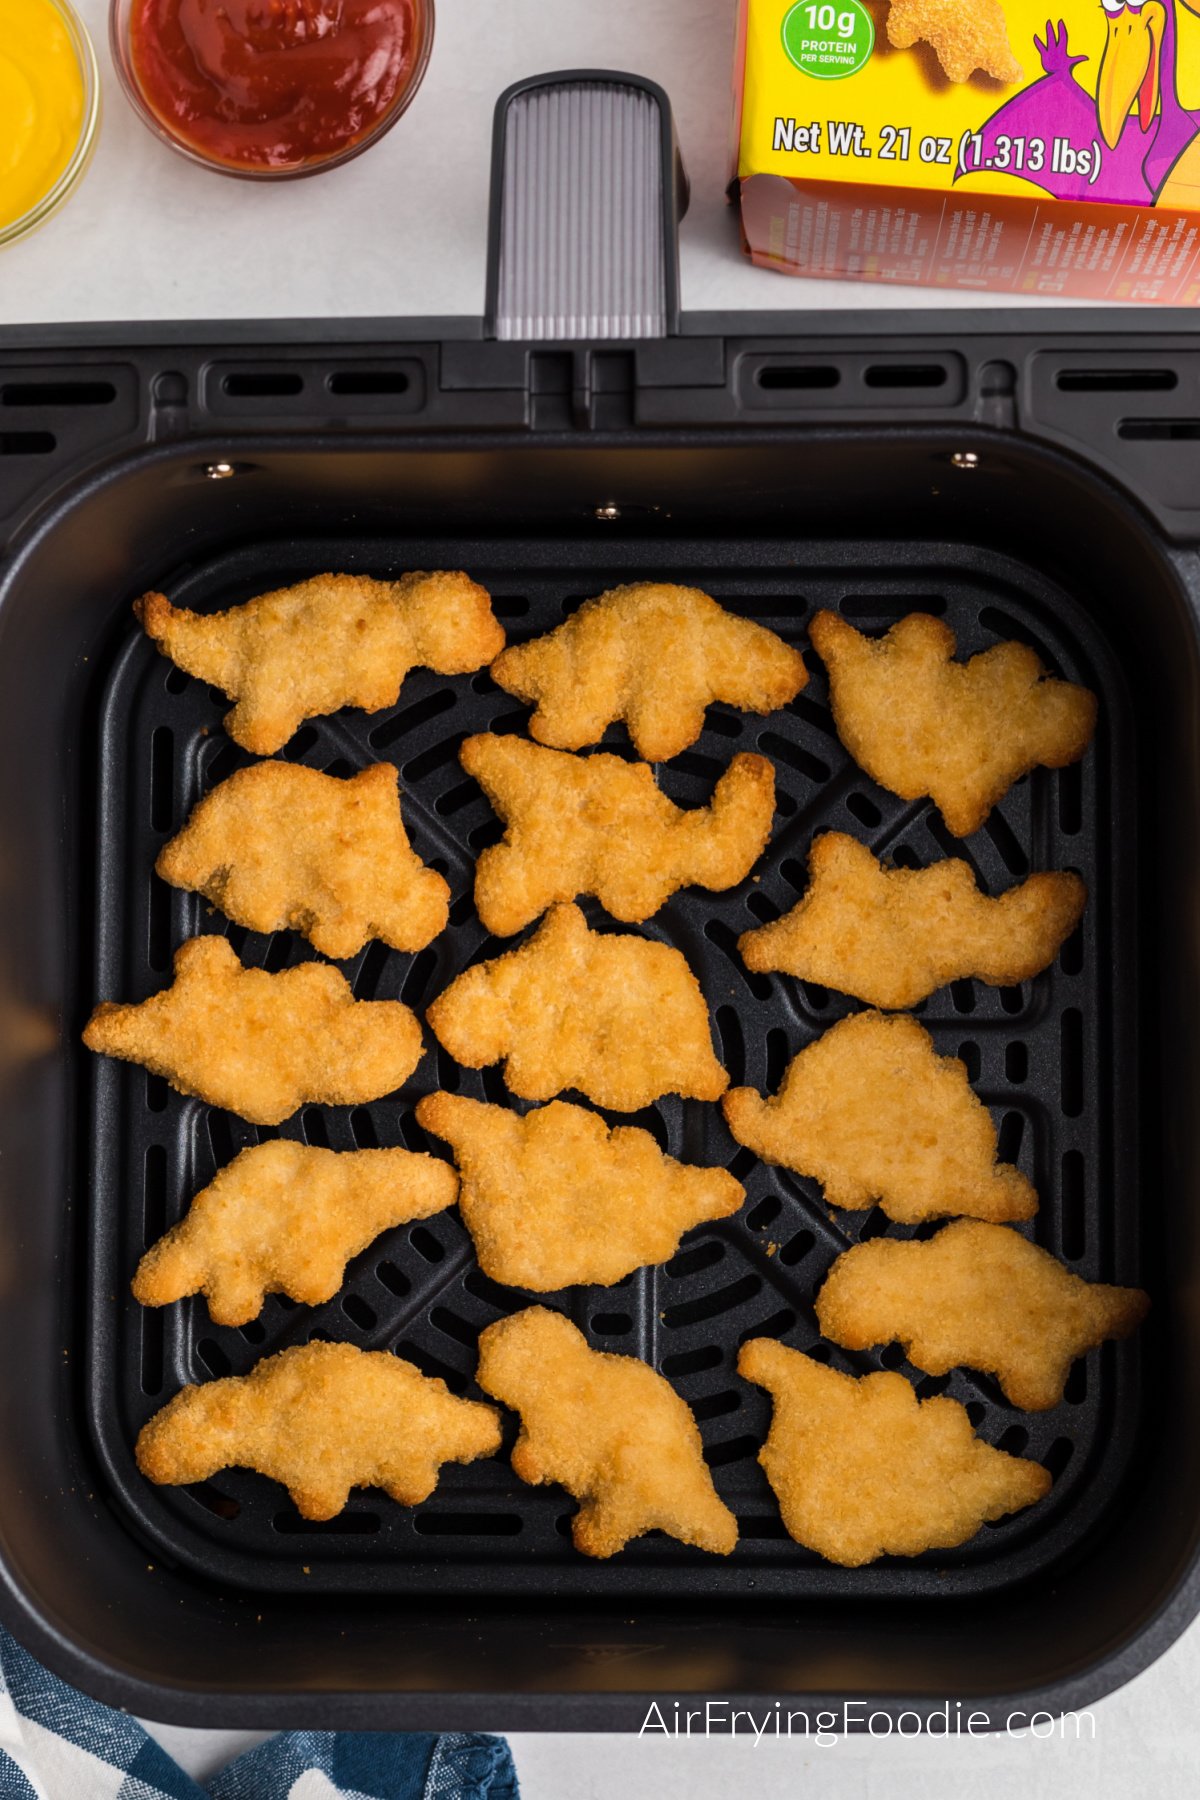 Single layer of air fried dino nuggets in the air fryer basket.